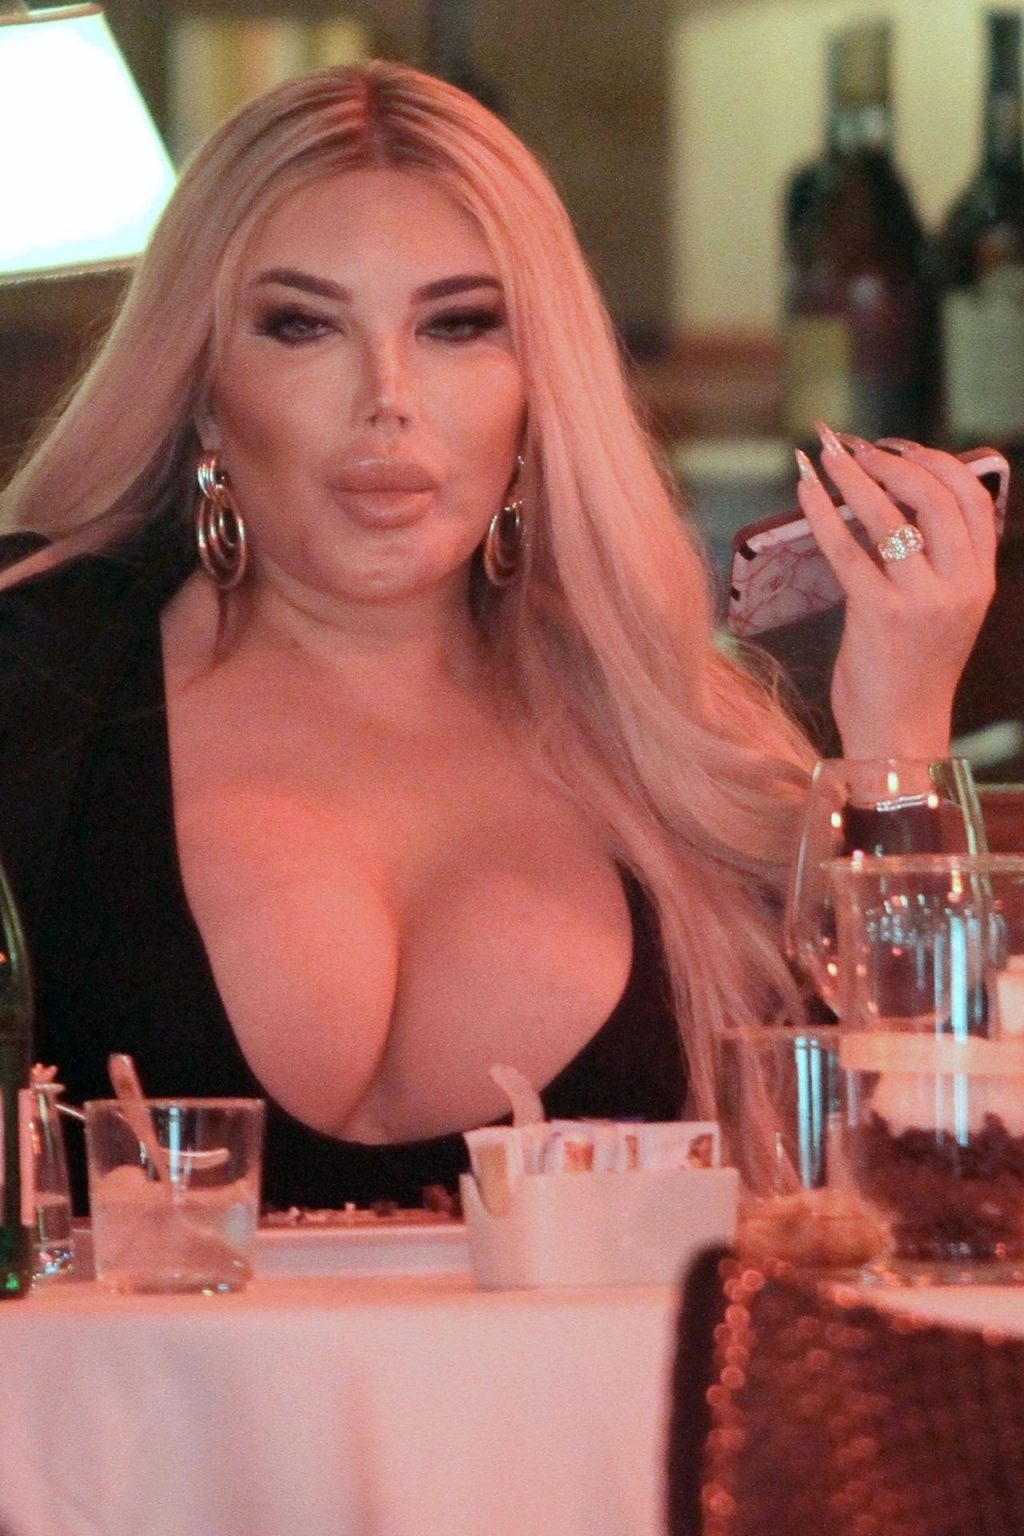 Jessica Alves Puts on a Busty Display Dining at Savini’s Restaurant in Milan (31 Photos)